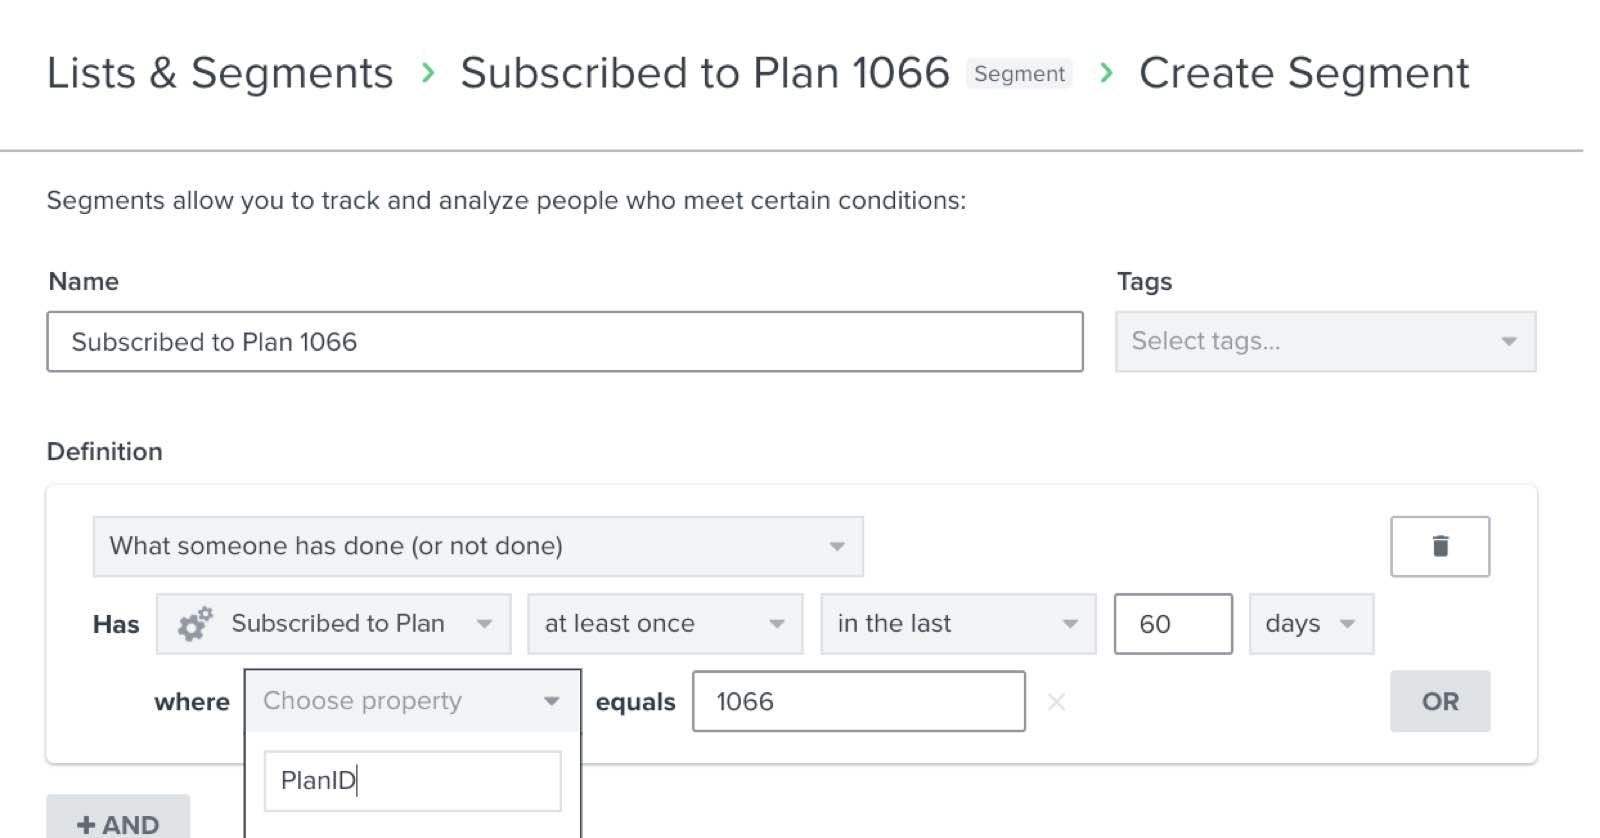 A segment relying on WooCommerce subscription data